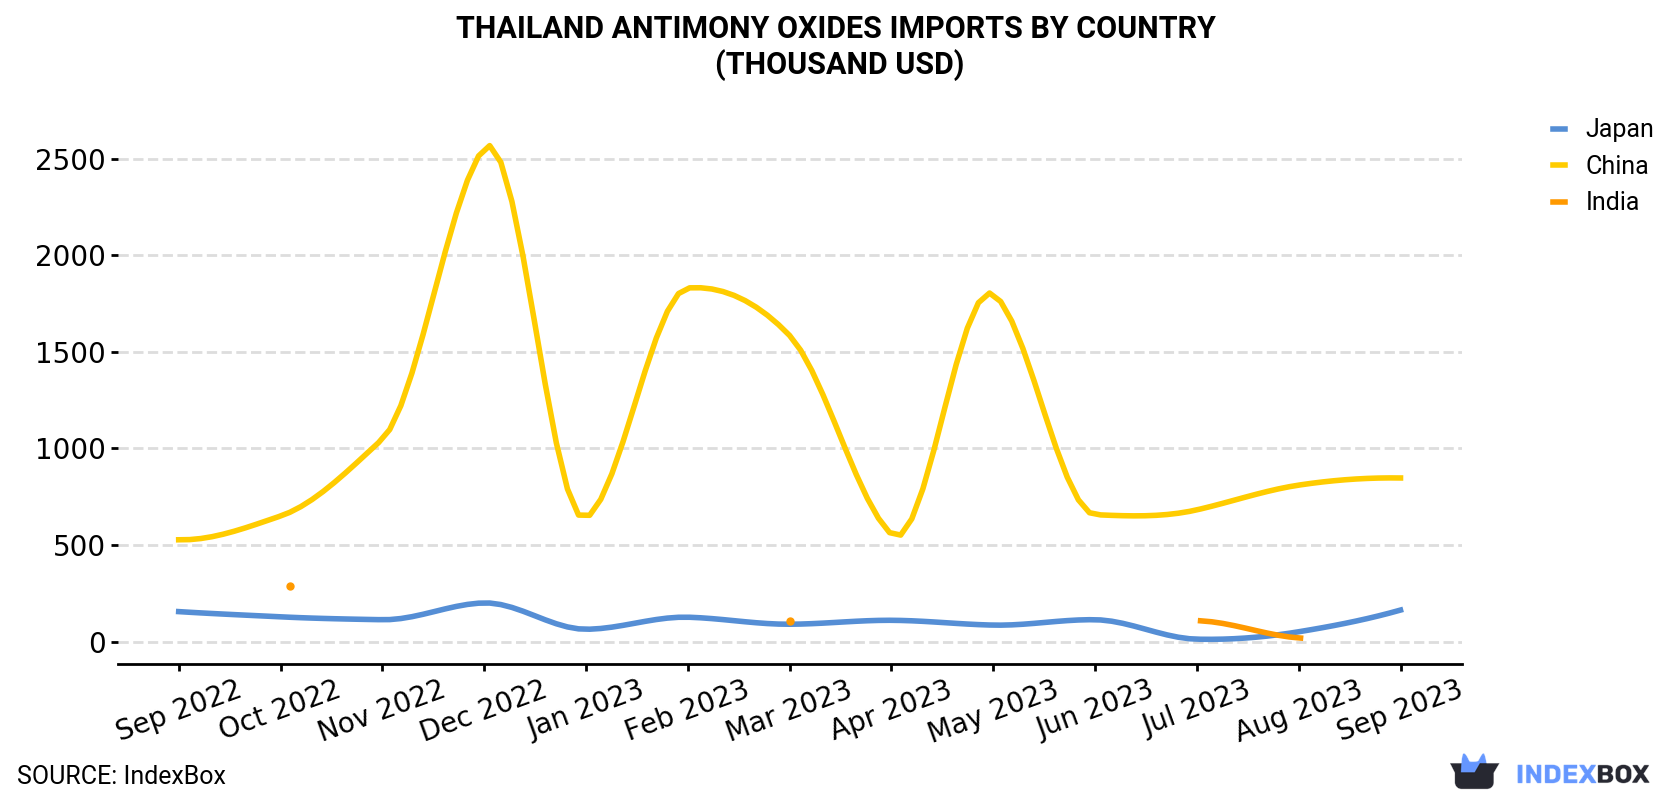 Thailand Antimony Oxides Imports By Country (Thousand USD)